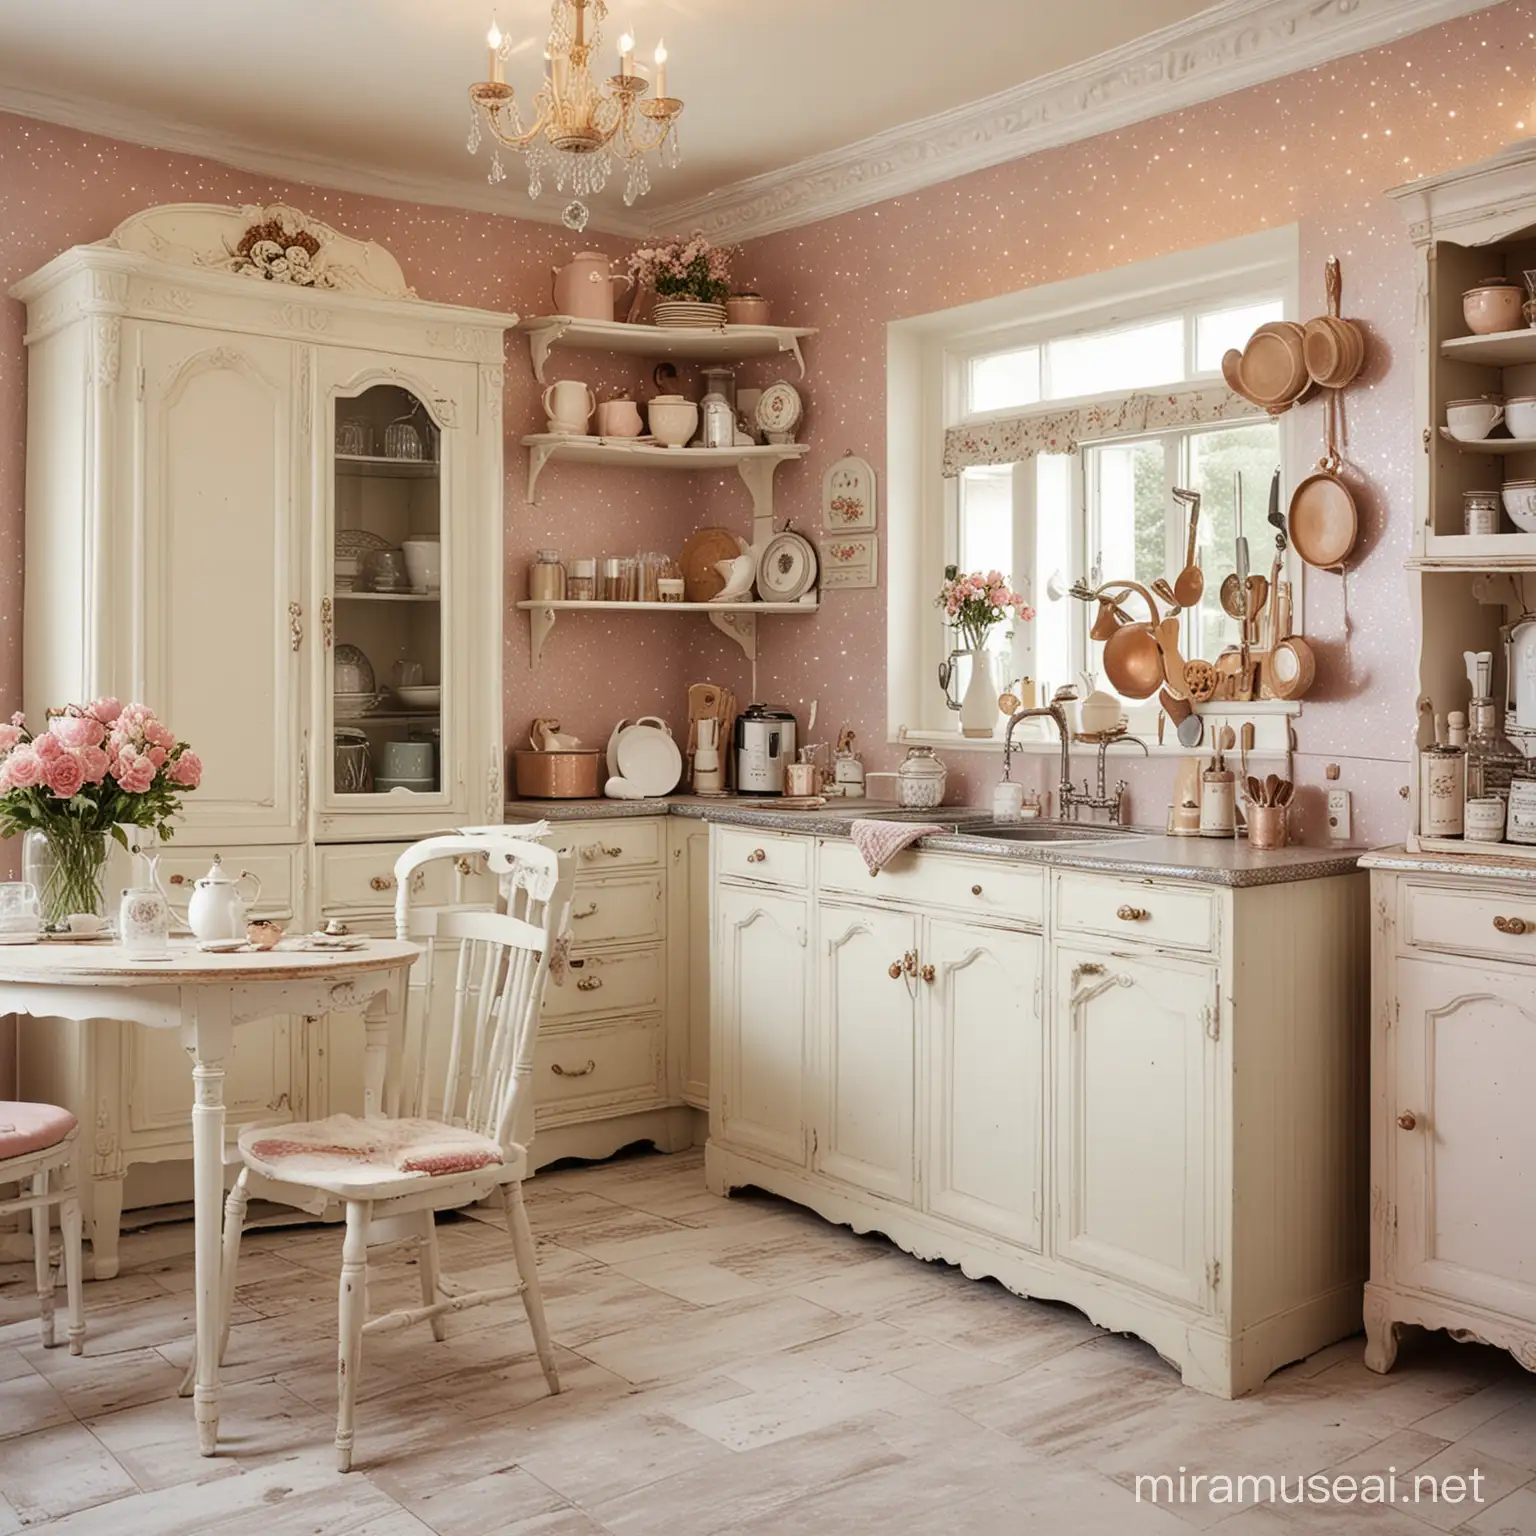 Charming Shabby Chic Vintage Kitchen Scene with Glittery Backdrop